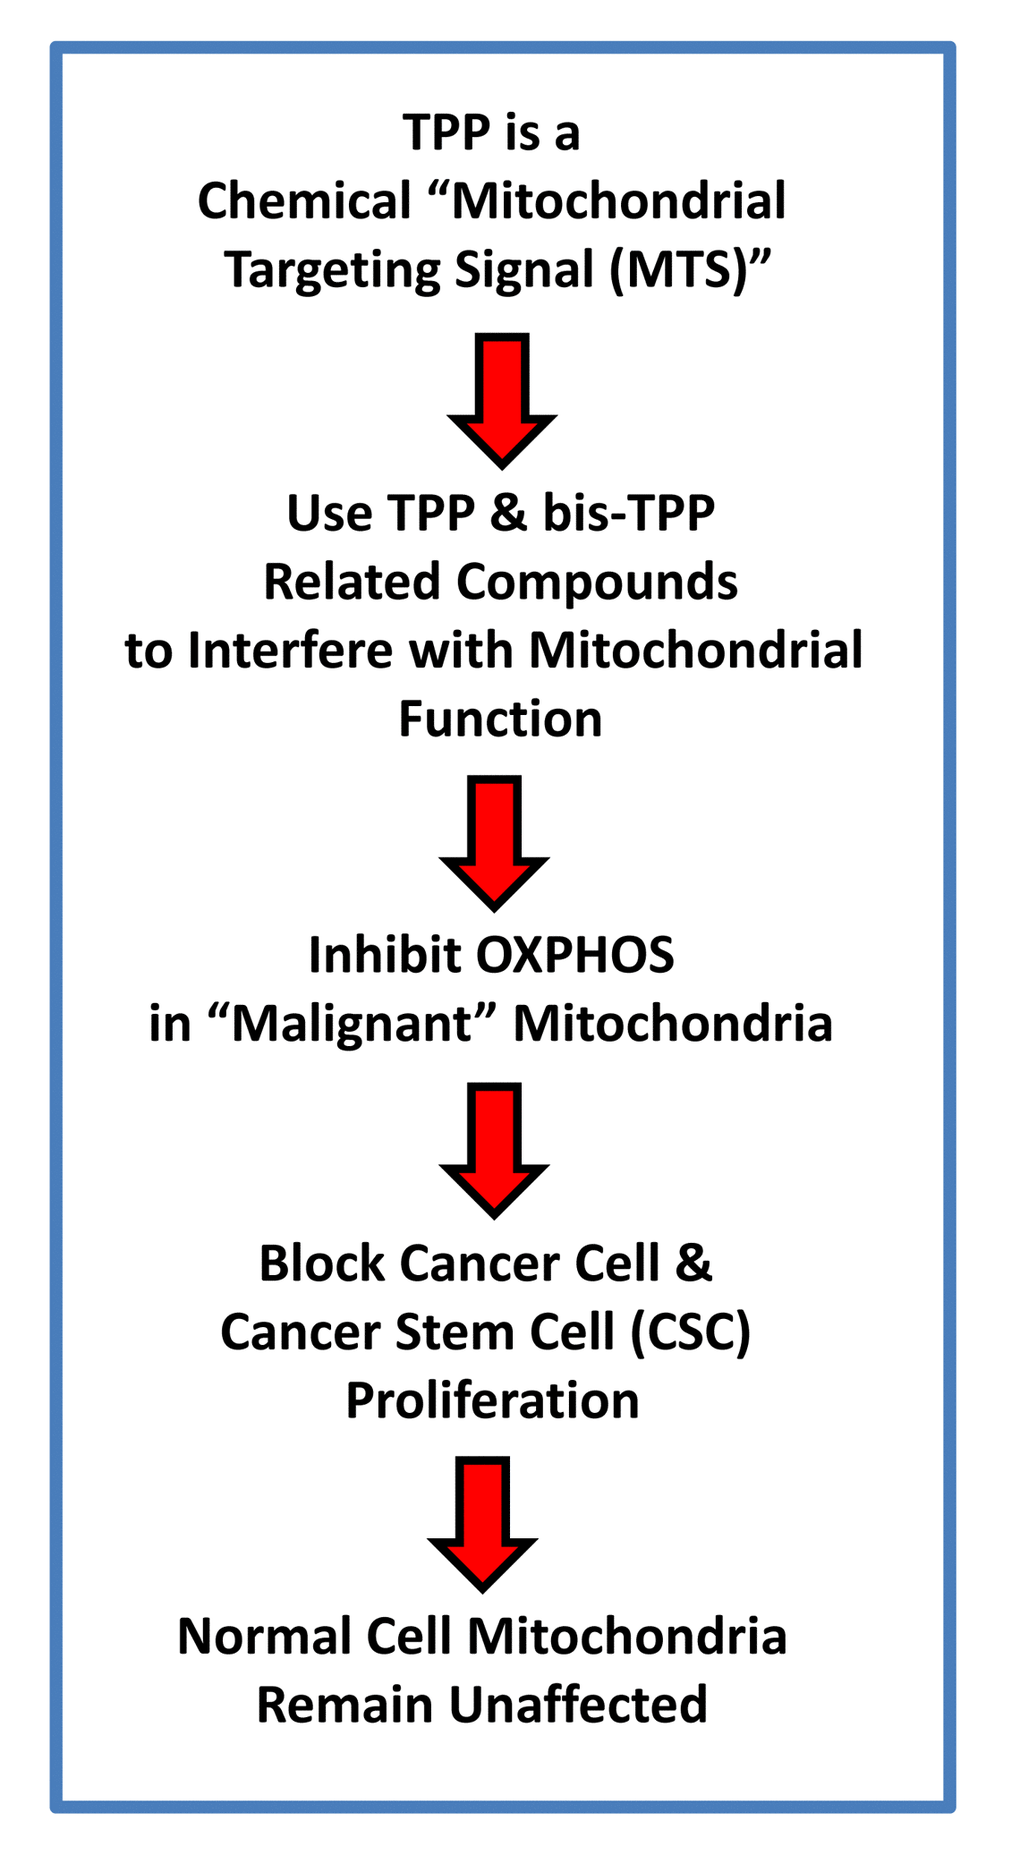 TPP-related compounds provide a novel chemical strategy for targeting “bulk” cancer cells and CSCs, while minimizing off-target side-effects in normal cells. Our results suggest that “malignant” mitochondria are functionally distinct from “normal” mitochondria. See text for further details.